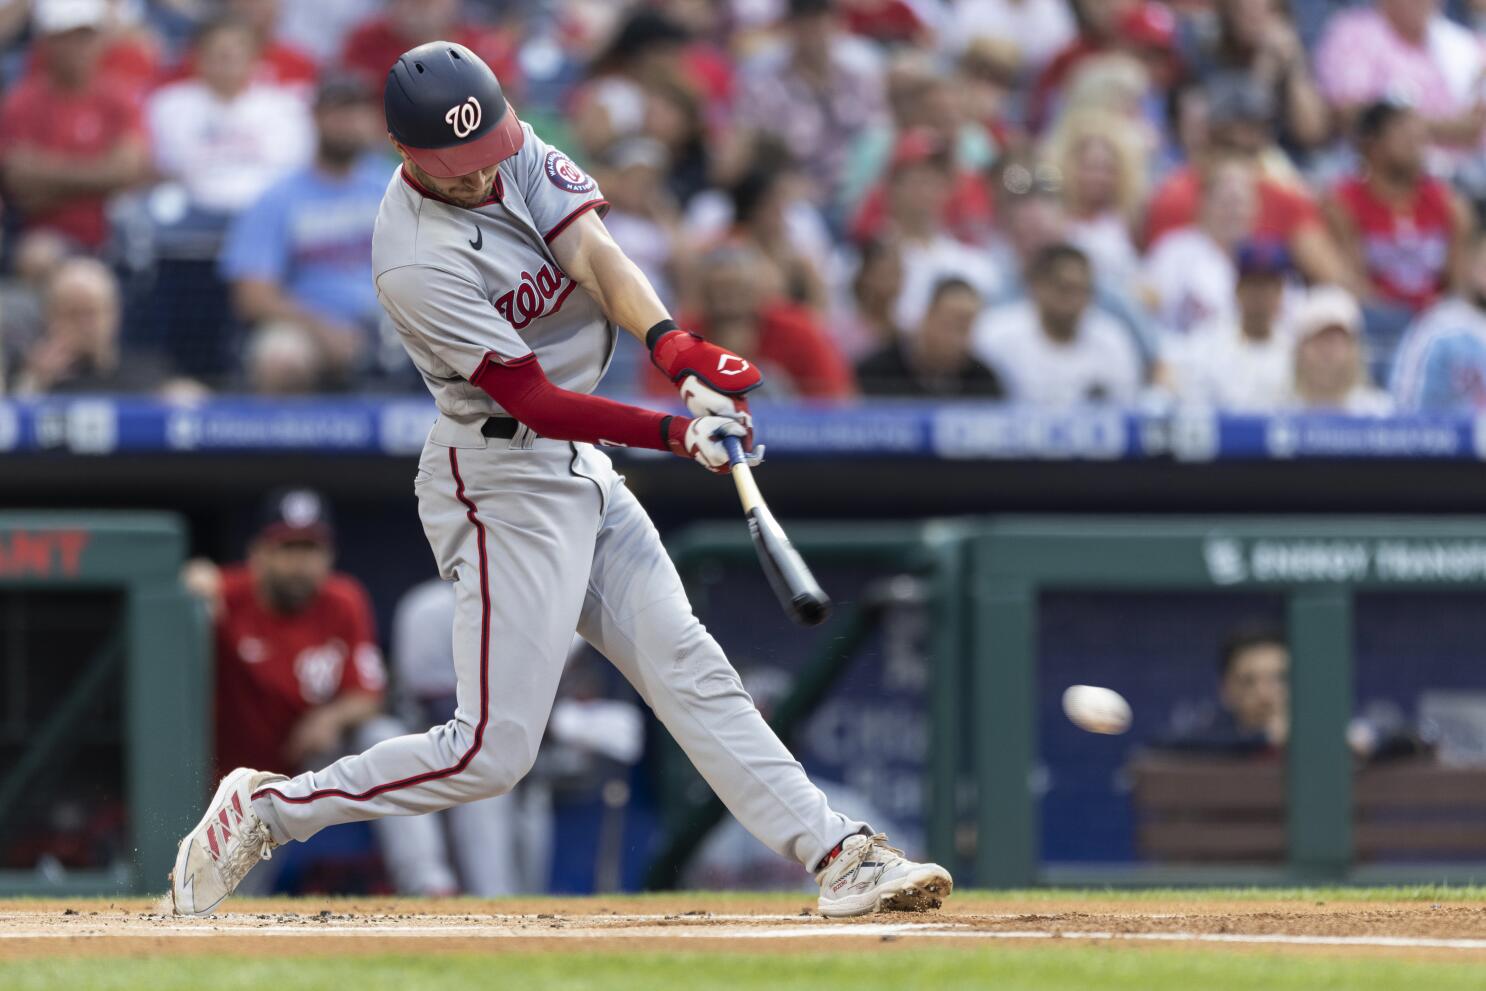 Nationals shortstop Trea Turner removed from game after positive